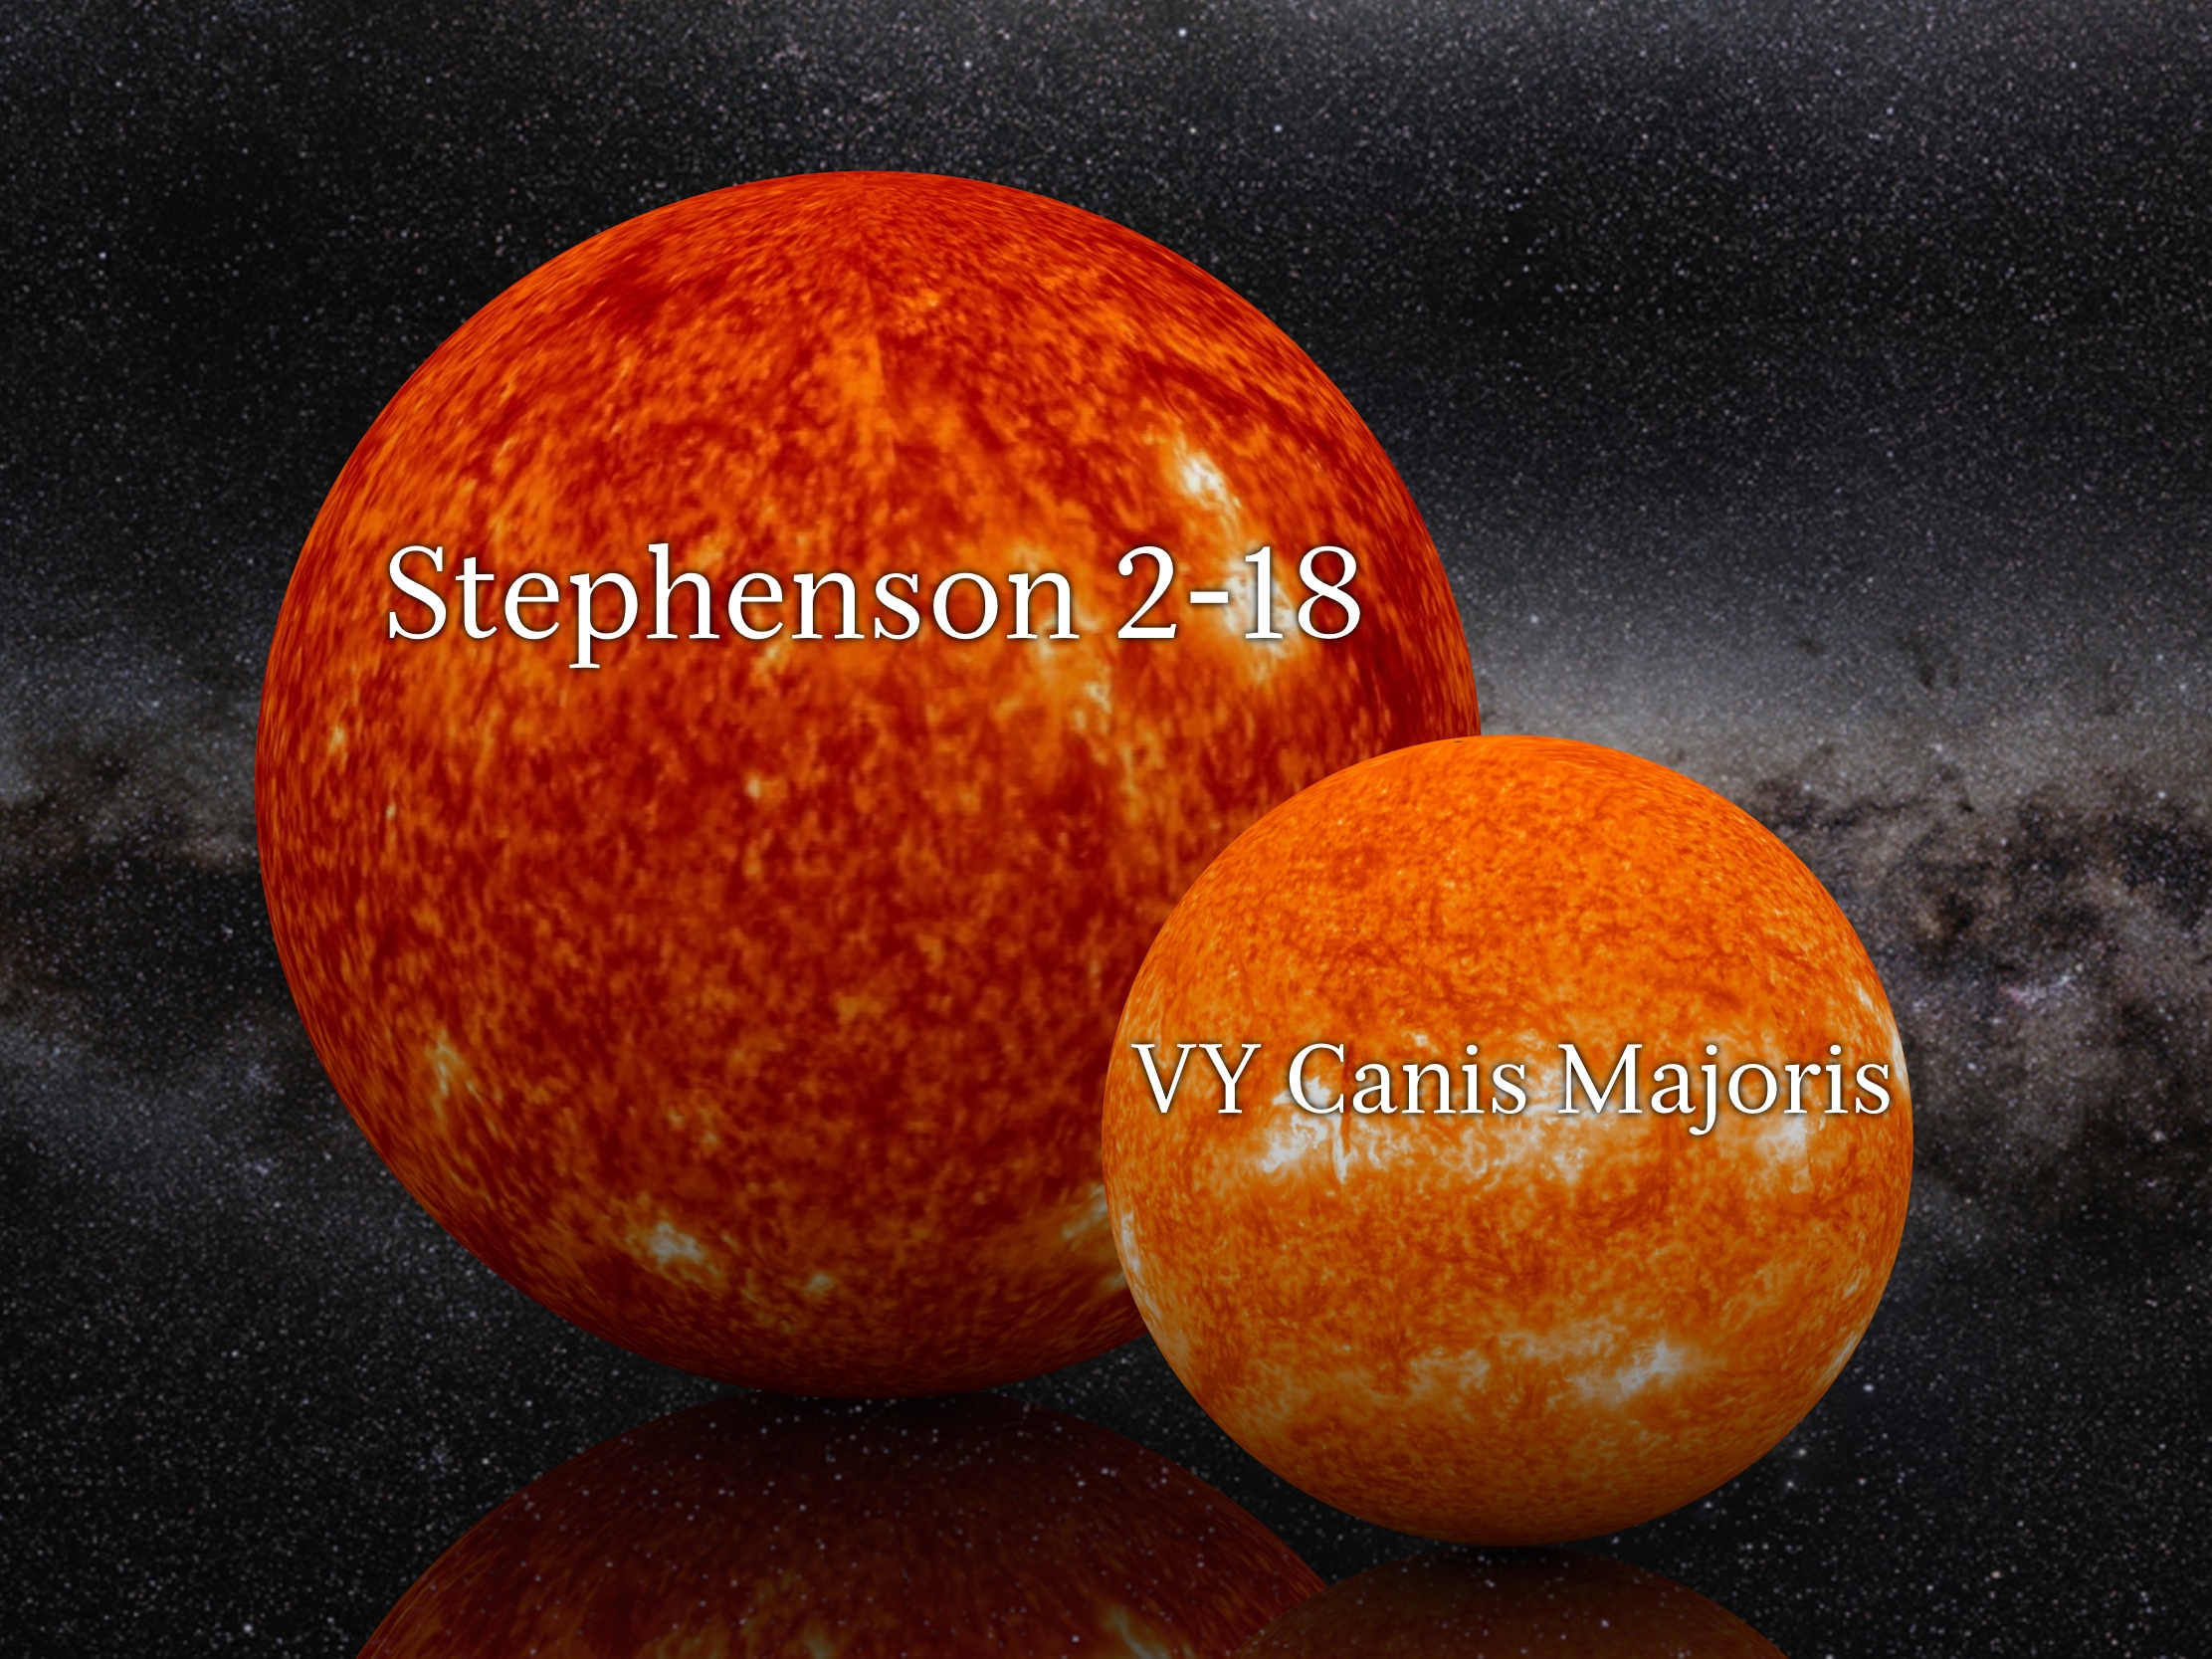 Size Comparison of Stephenson 2 18 and VY Canis Majoris